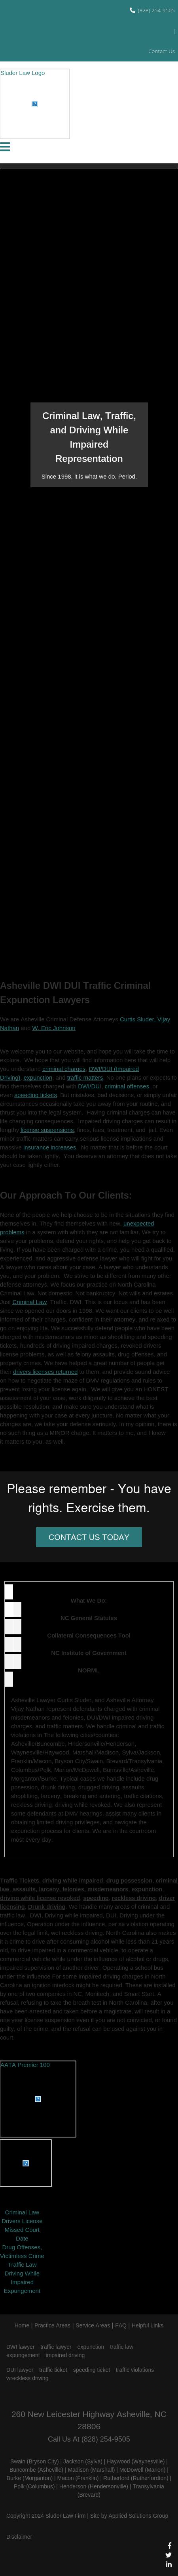 Curtis Sluder Law Firm, P.C. - Asheville NC Lawyers